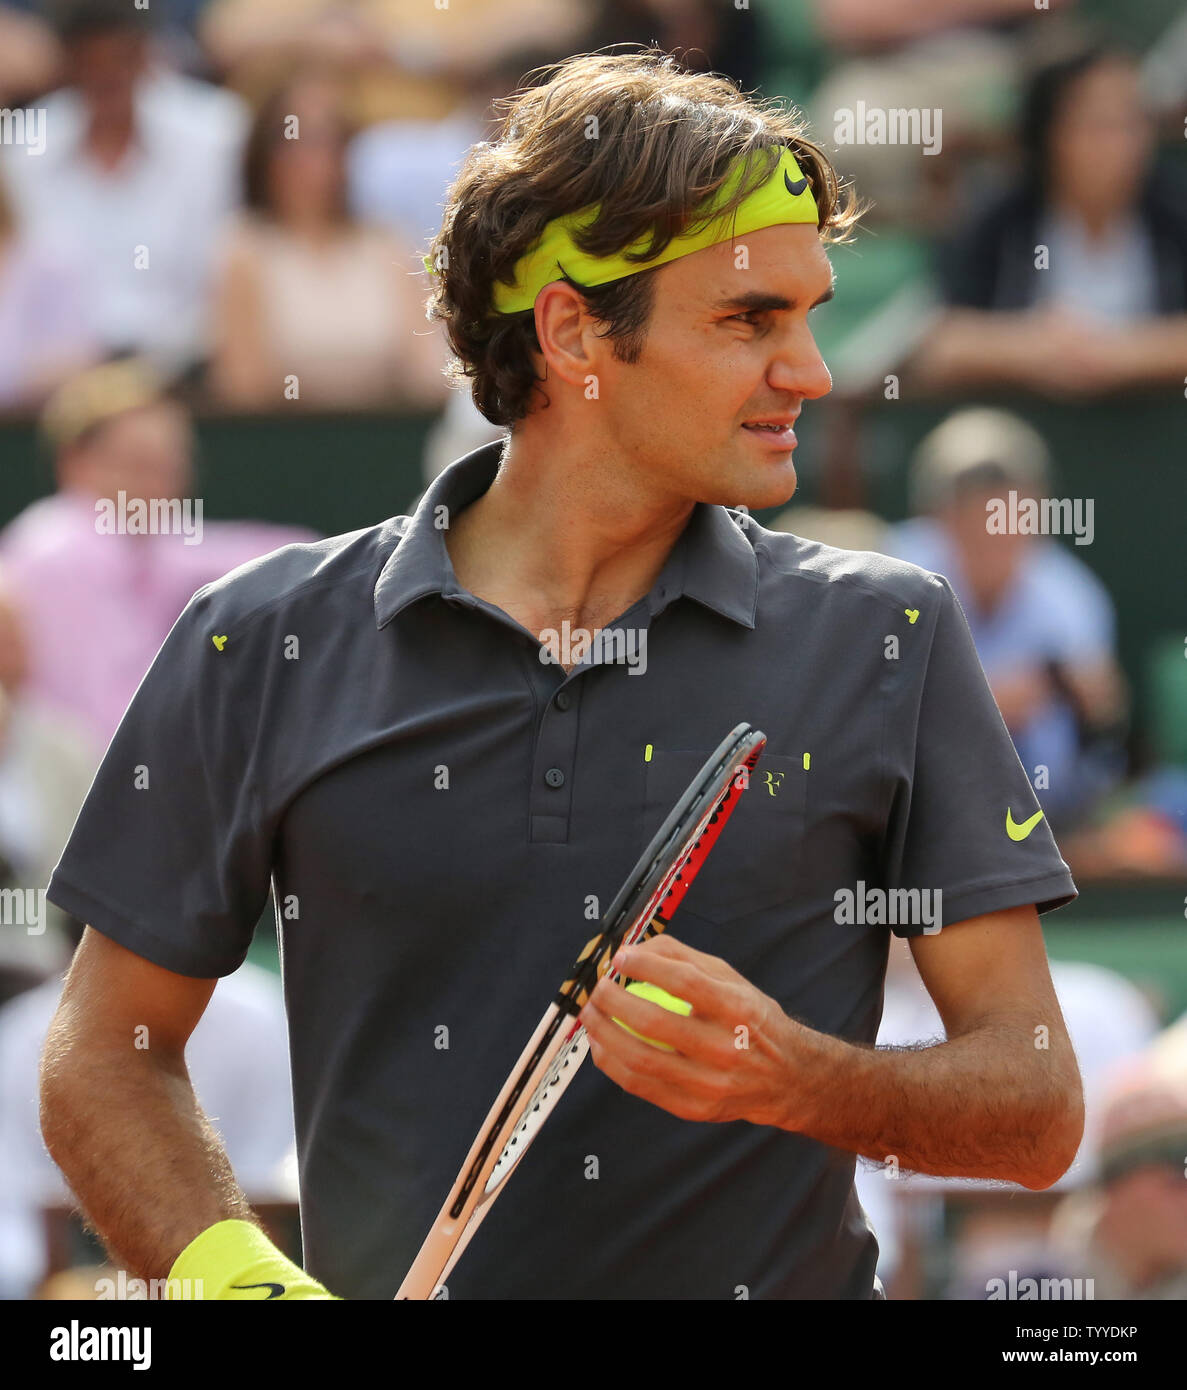 Roger Federer of Switzerland pauses during his French Open mens third round  match against Frenchman Nicolas Mahut at Roland Garros in Paris on June 1,  2012. Federer defeated Mahut 6-3, 4-6, 6-2,